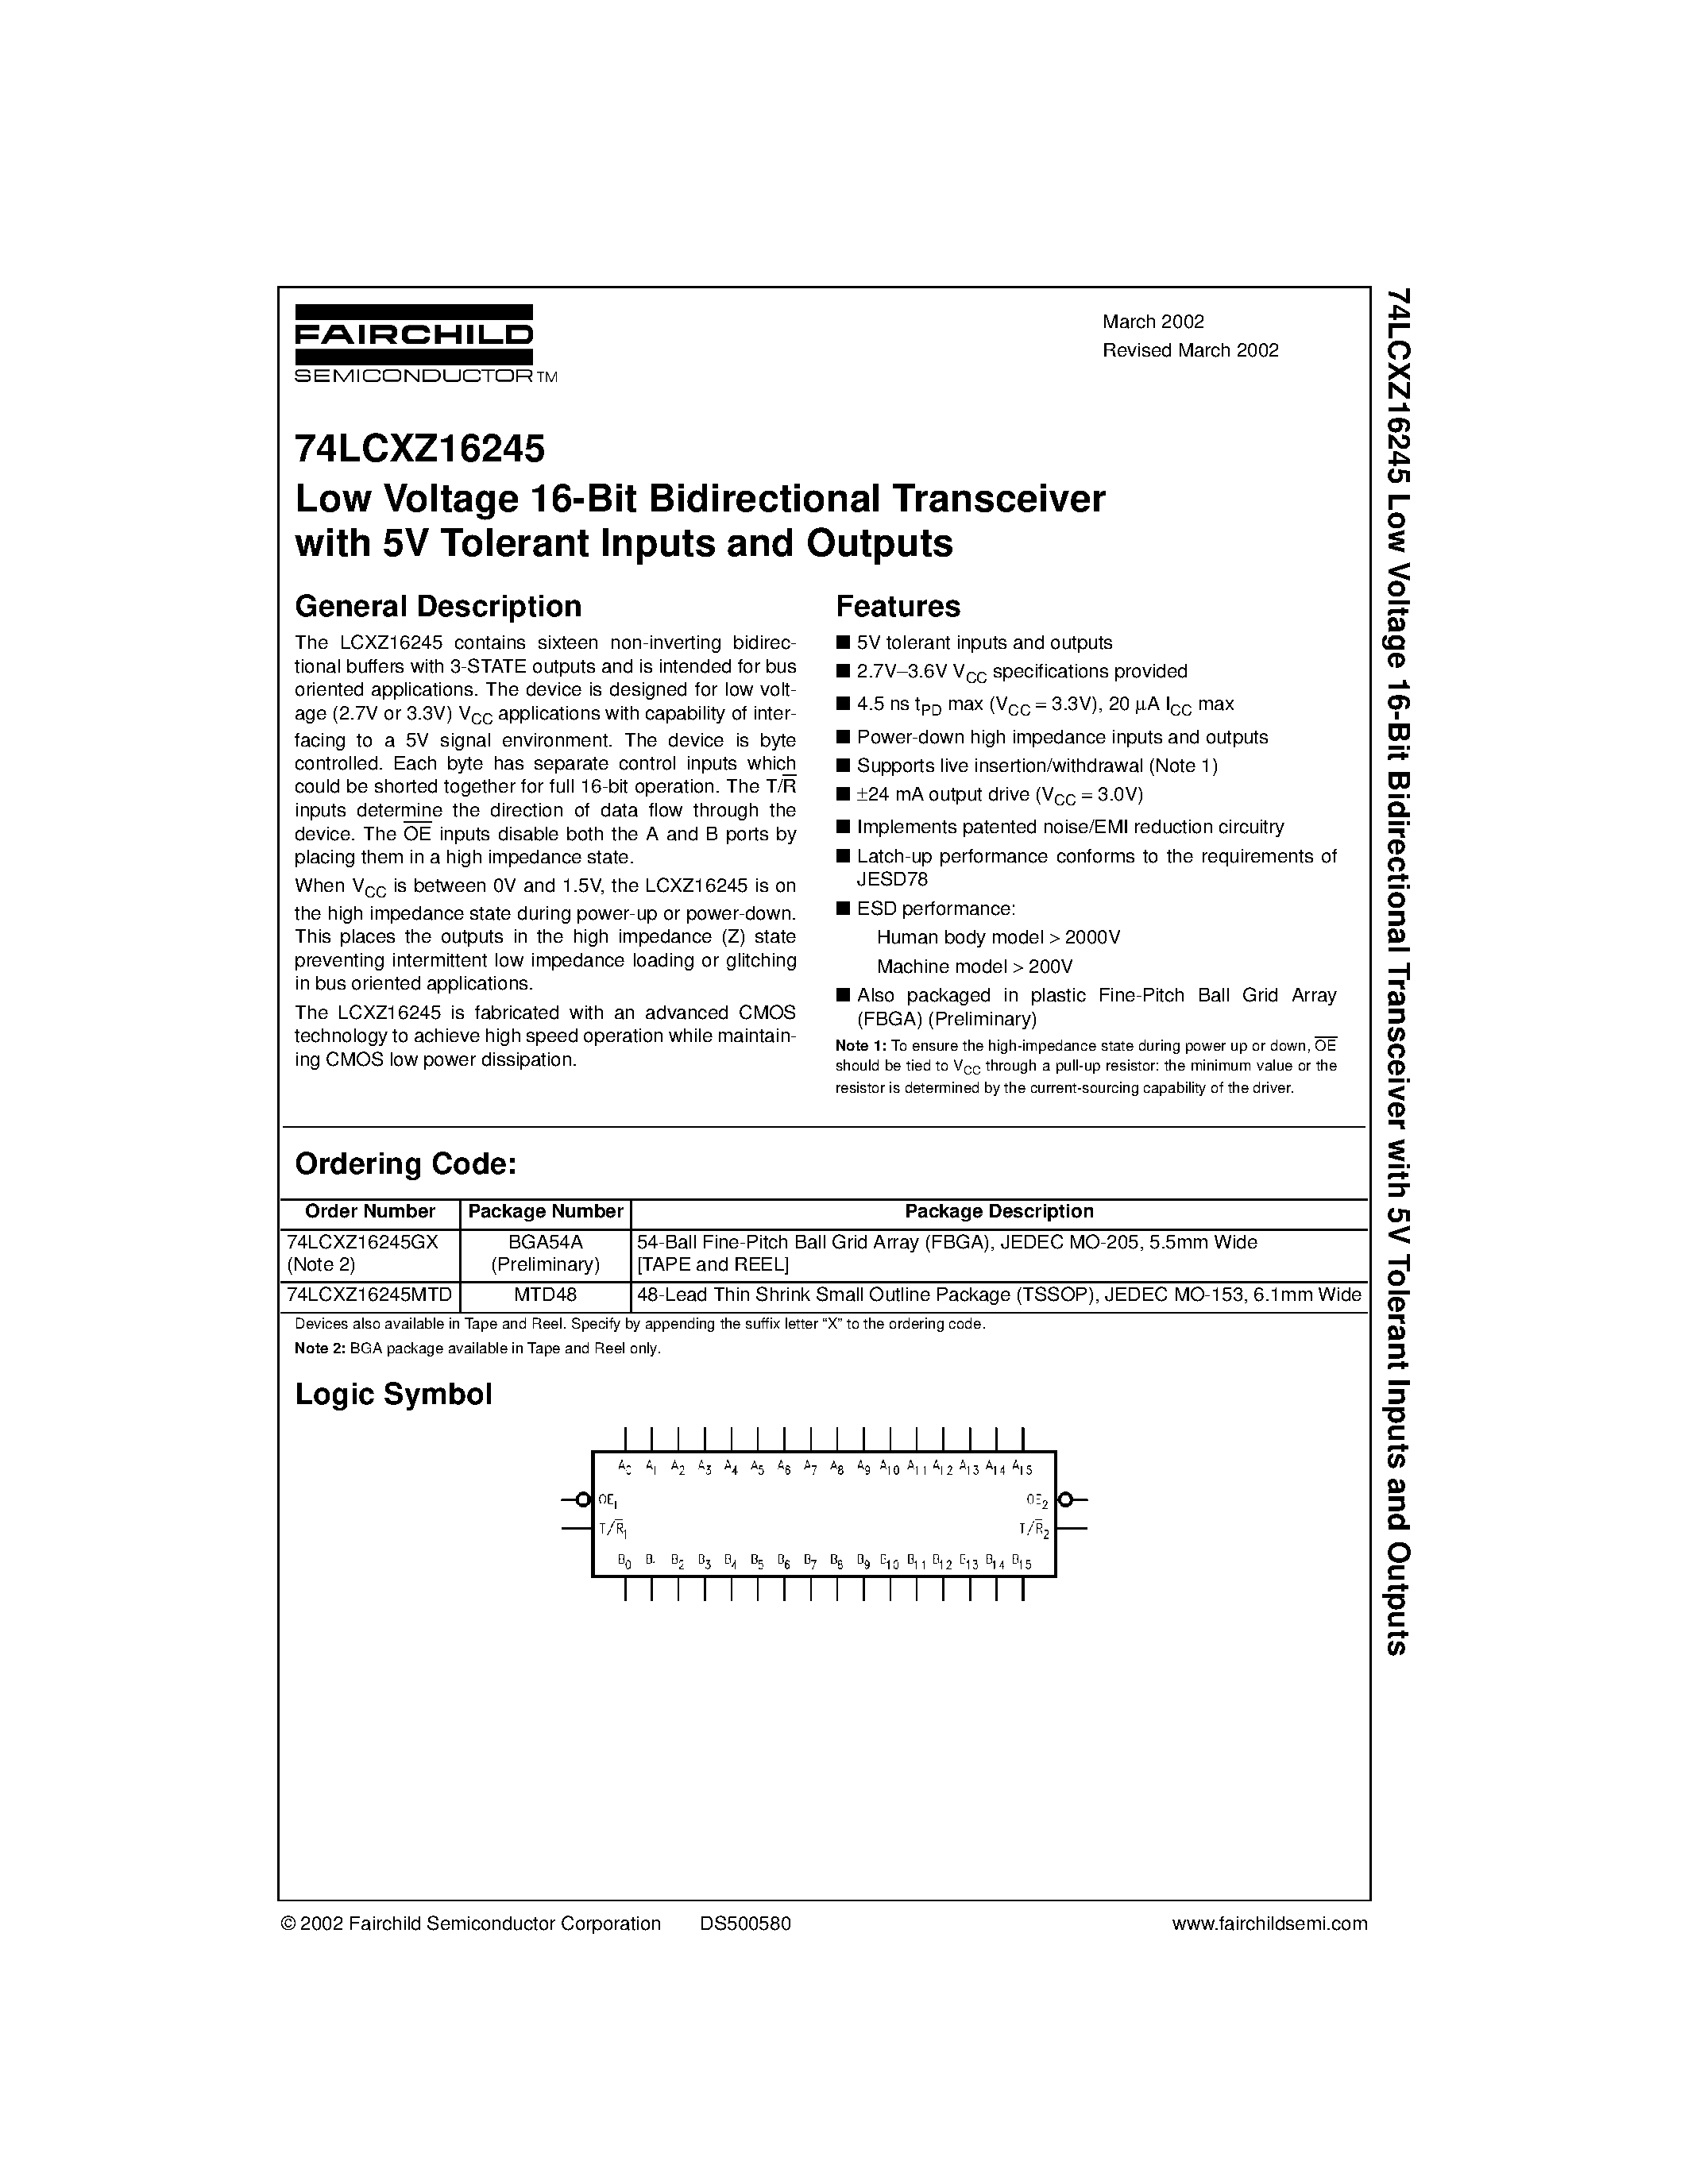 Datasheet 74LCXZ16245 - Low Voltage 16-Bit Bidirectional Transceiver with 5V Tolerant Inputs and Outputs page 1